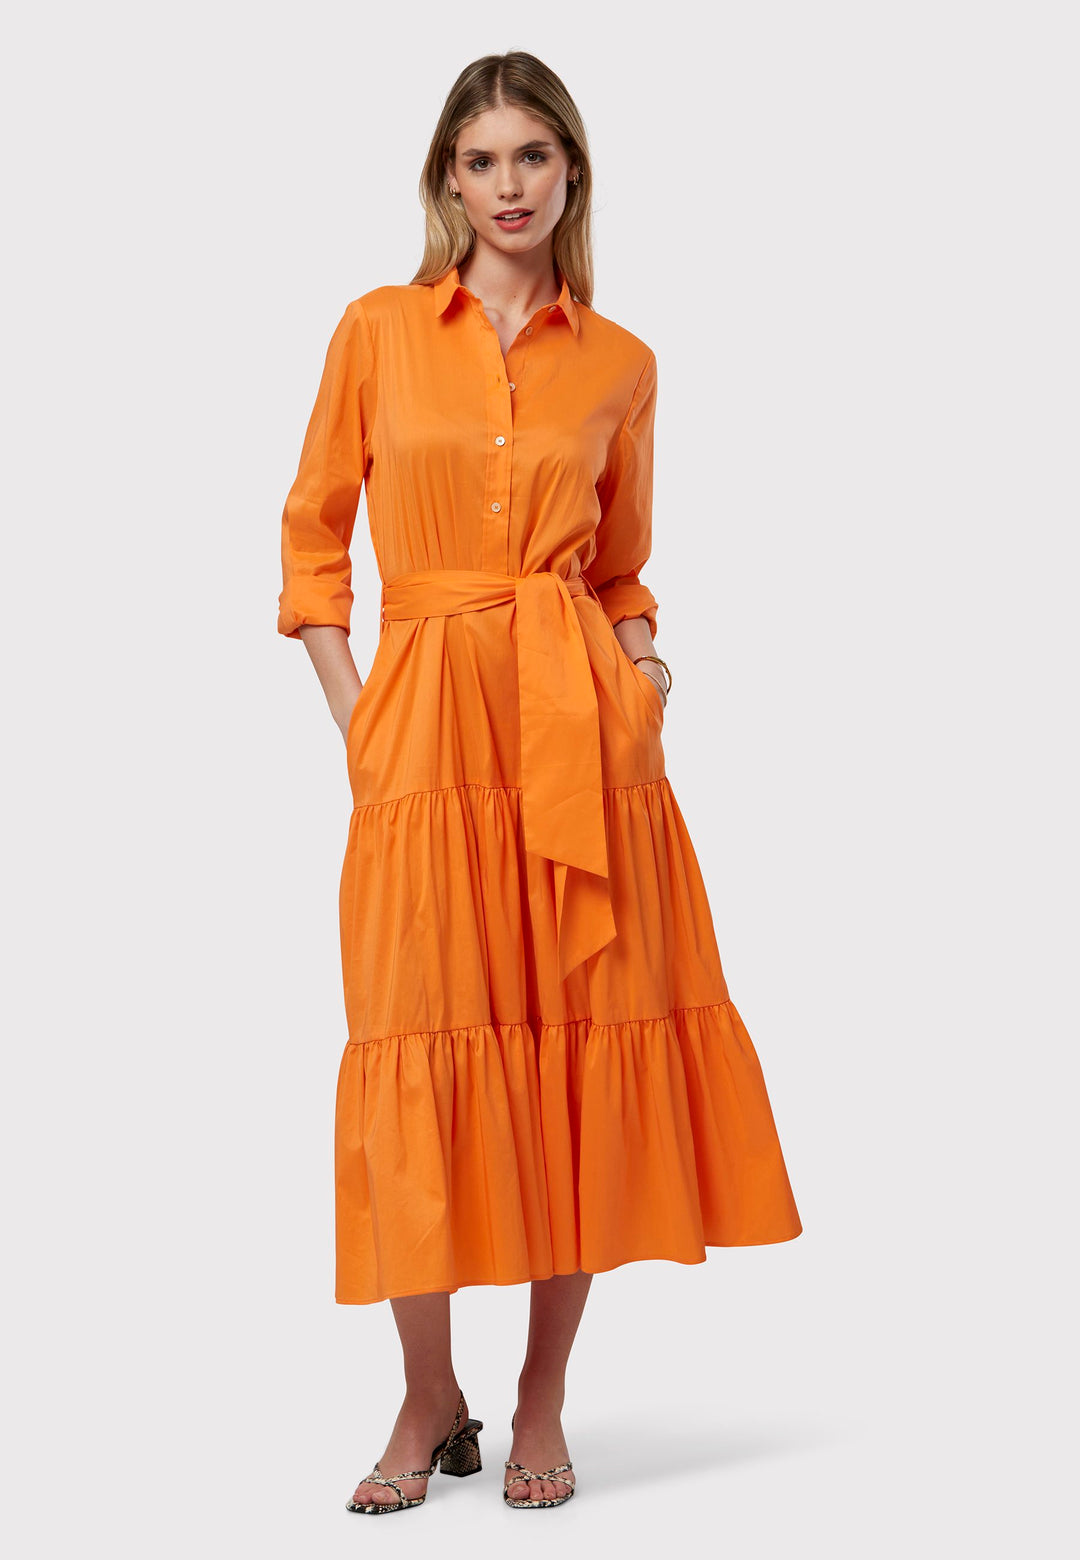 Adele Orange Dress, crafted in poplin in a vibrant orange hue. The design features a classic shirt collar and a button finish to the waist, ensuring a flattering fit that accentuates the hips. The dress gracefully transitions into a gathered tiered skirt, adding a touch of femininity. Complete with a detachable belt, practical pockets, and standard full-length shirt sleeves, this dress will take you anywhere.